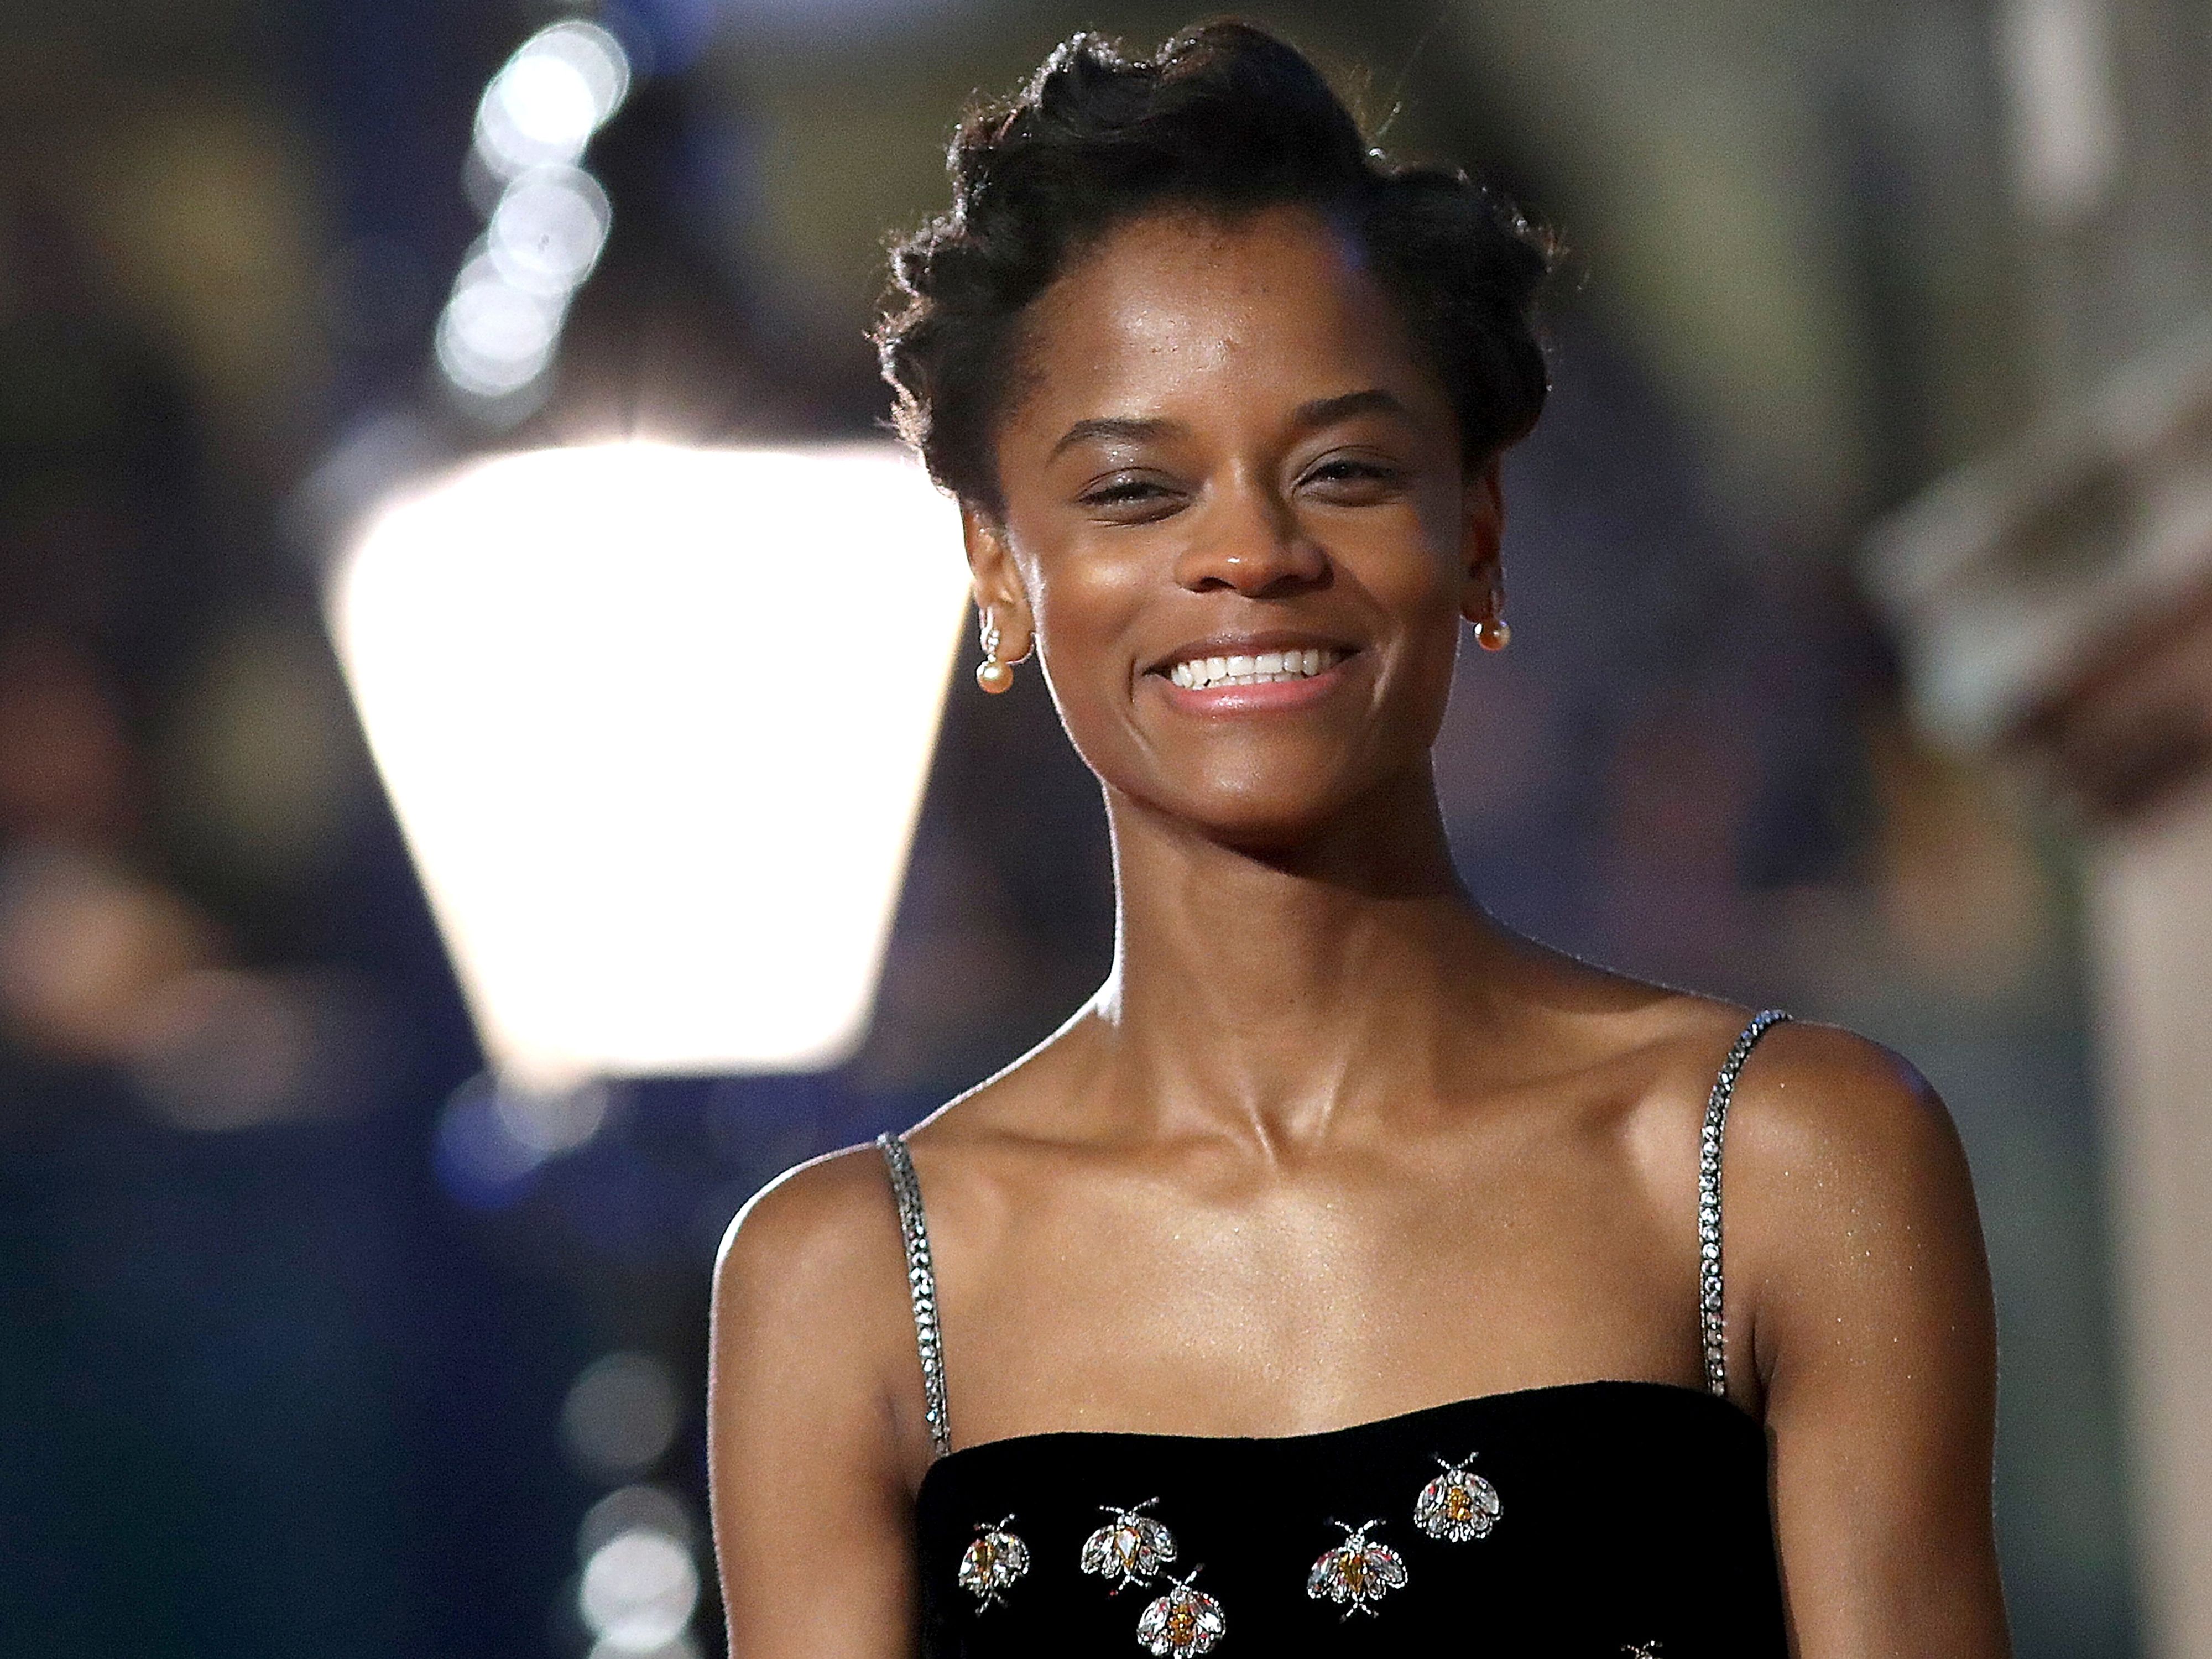 Letitia Wright was the top box office earner in 2018